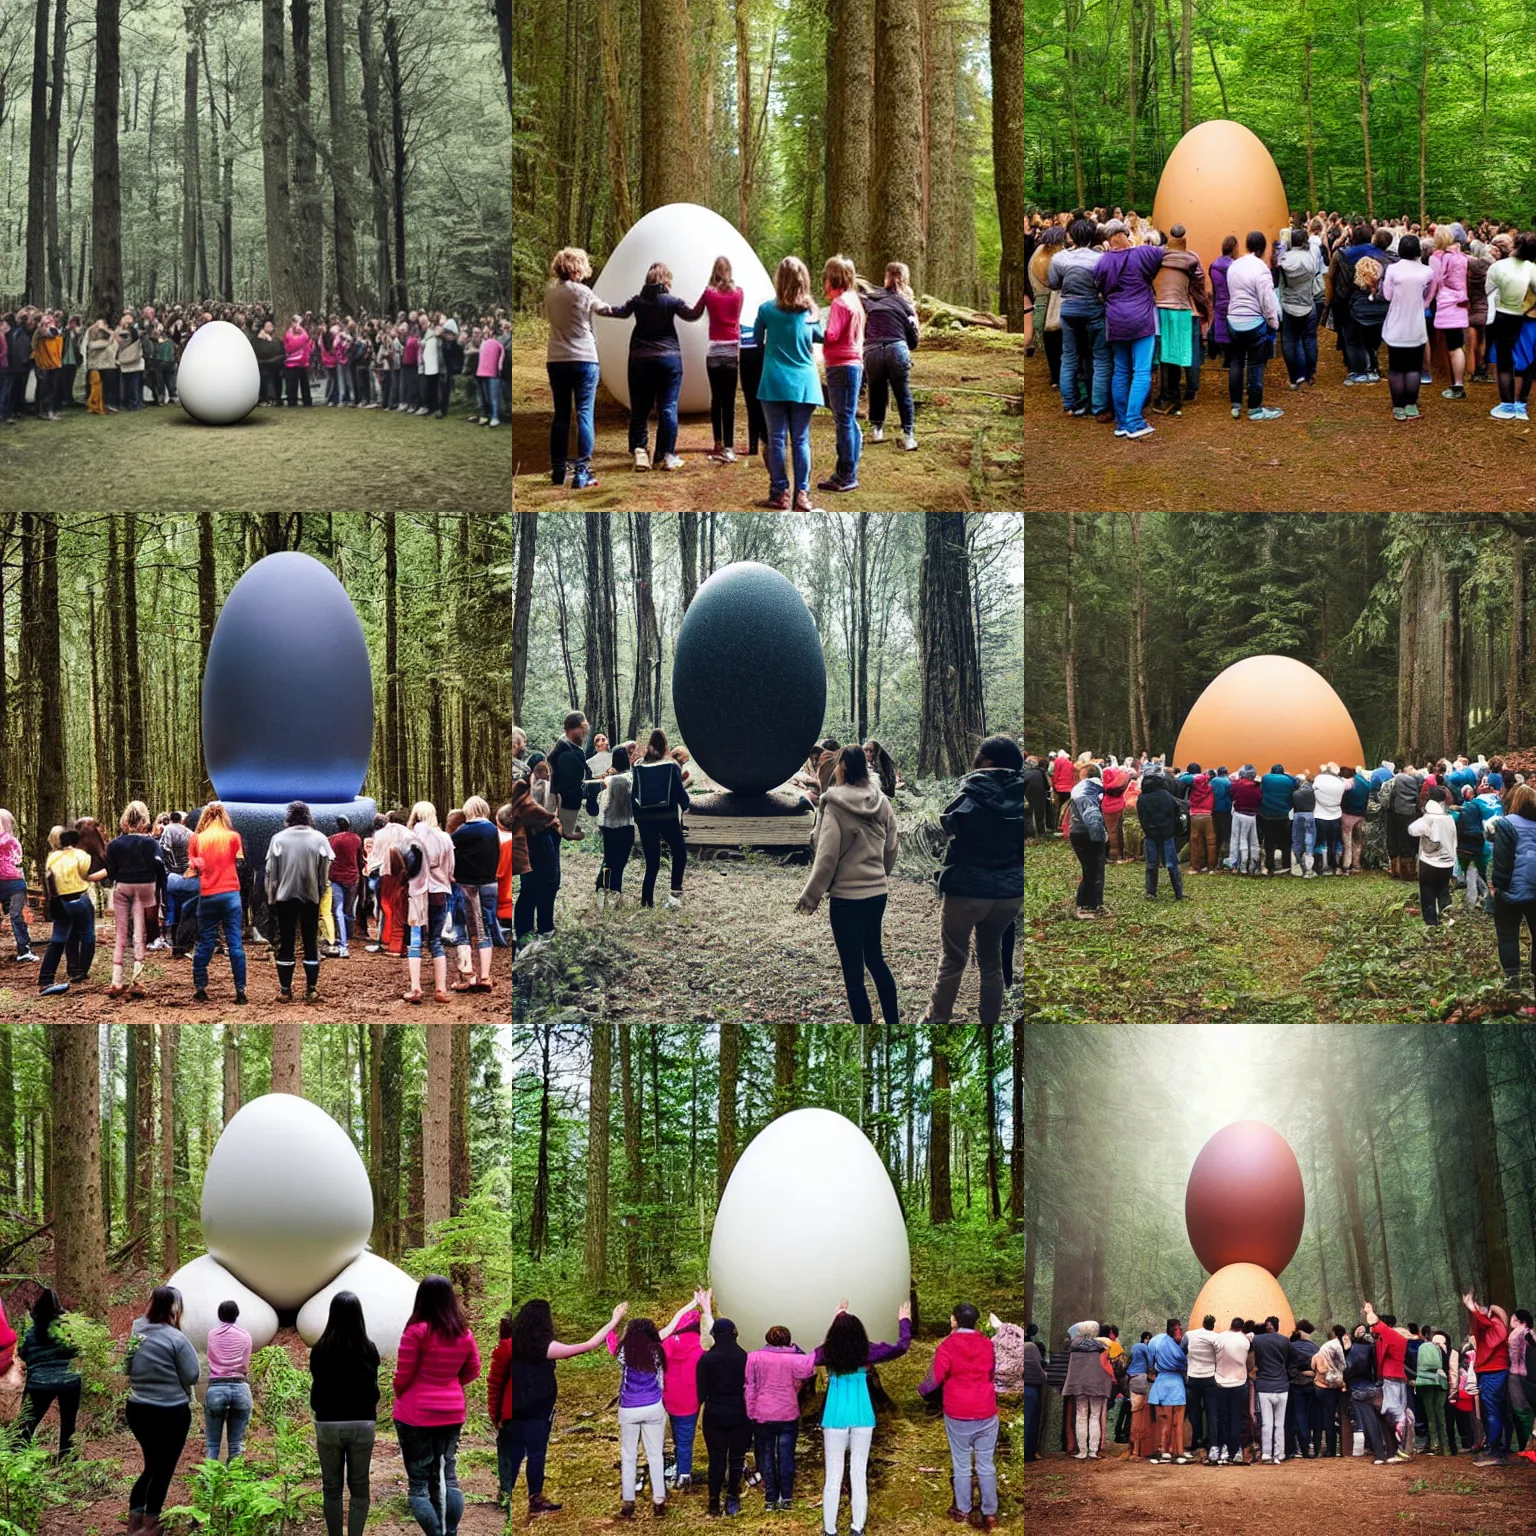 Prompt: photograph of a group of people worshipping a giant egg in a forest